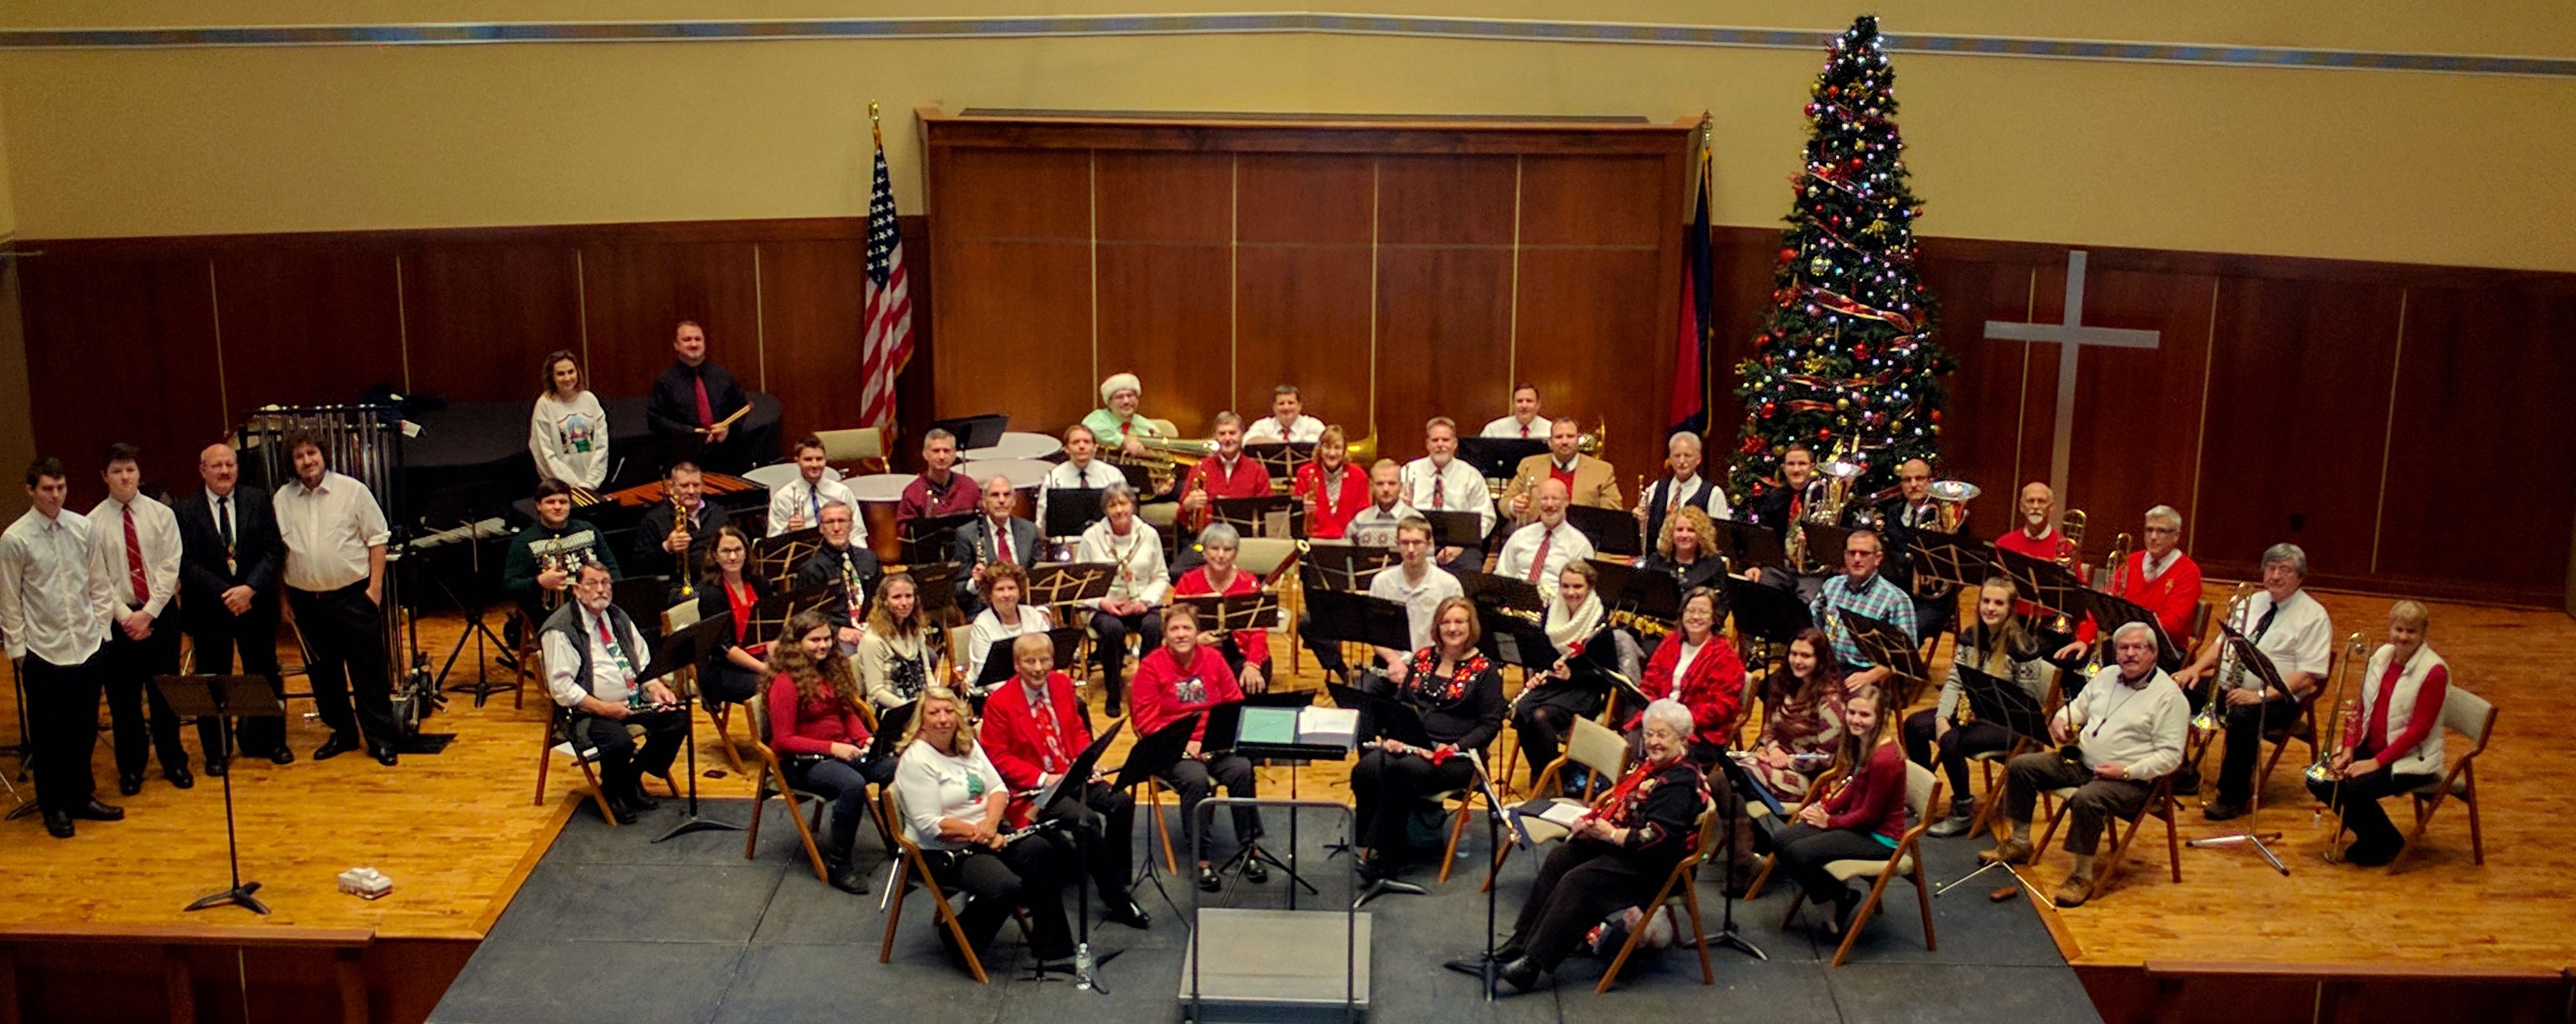 Quincy Park Band Christmas